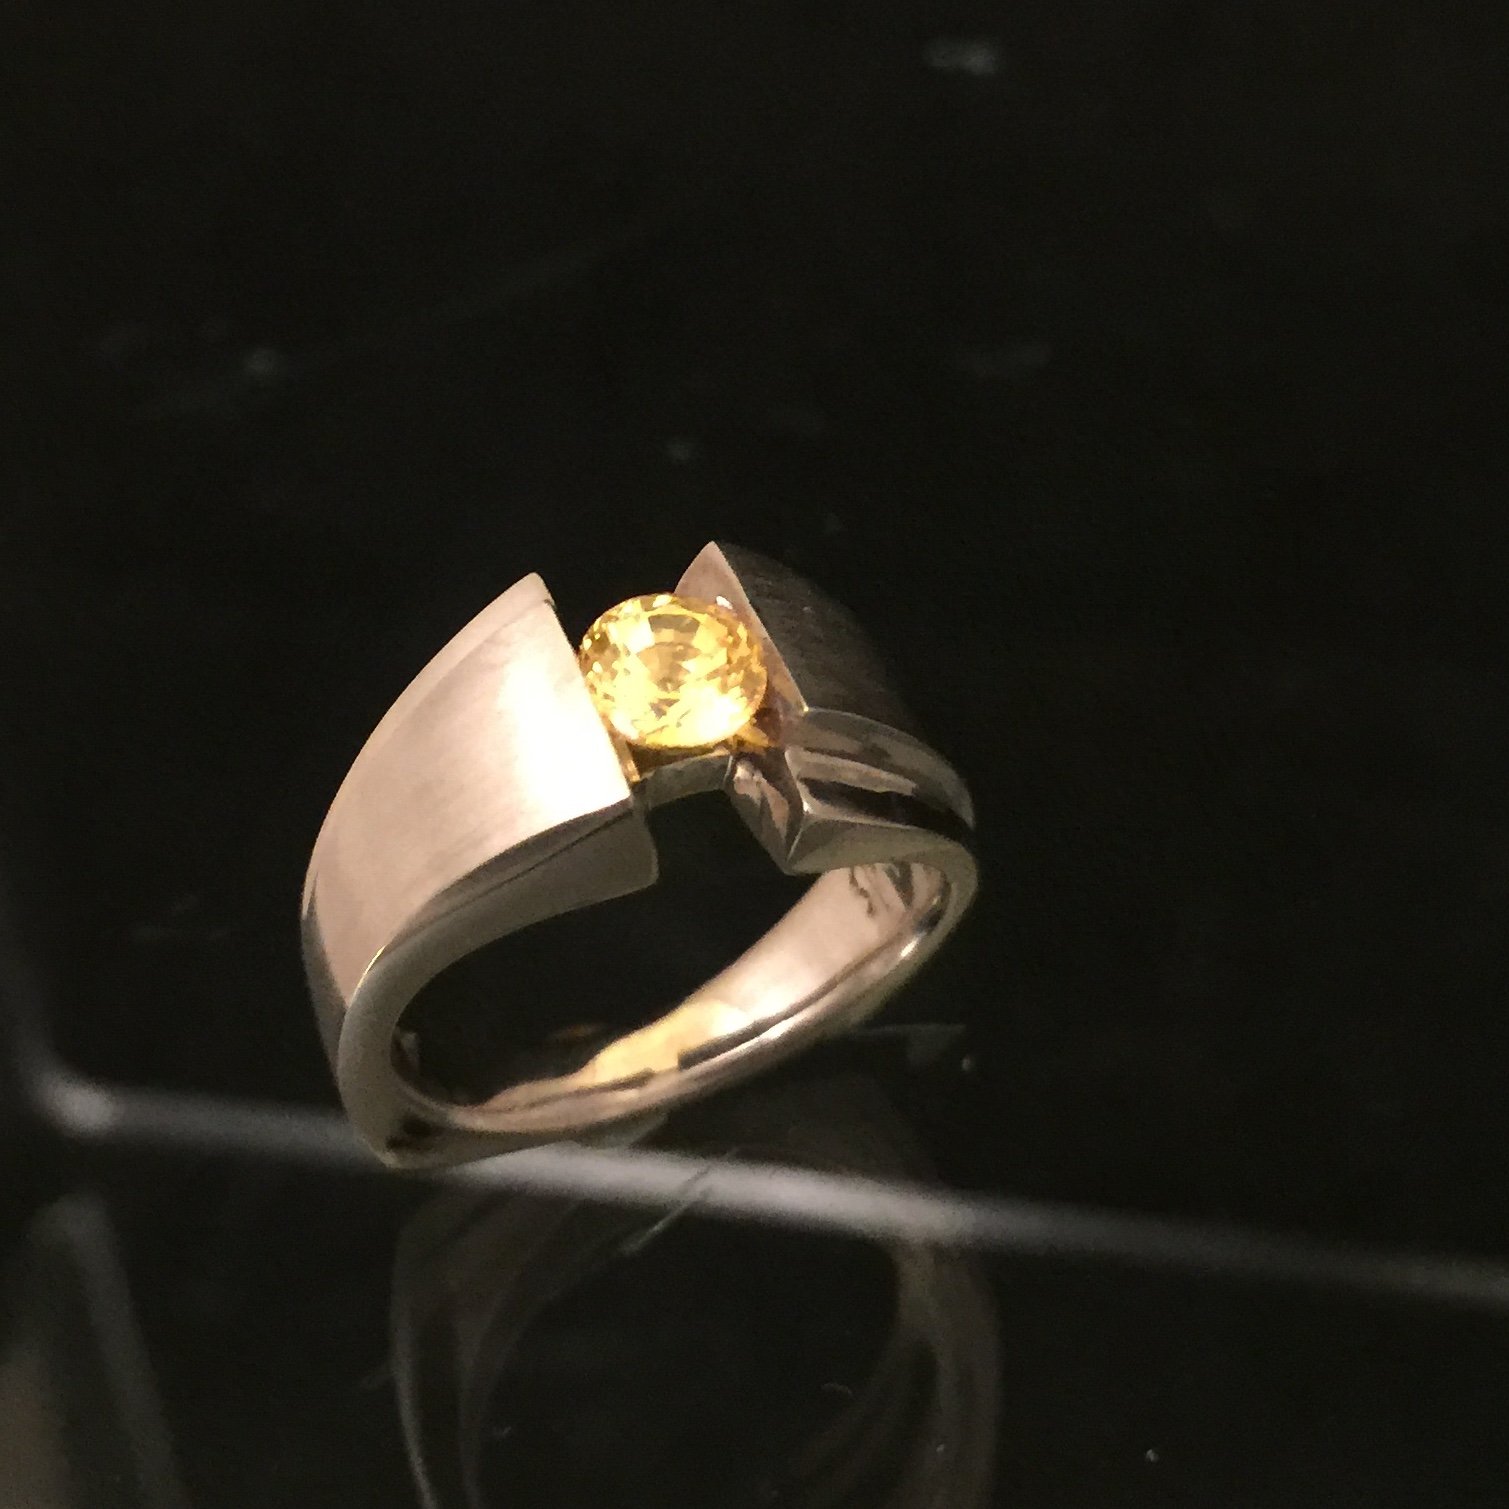 Lotus Flower Ring with Yellow Sapphire & Meteorite | Jewelry by Johan -  6.75 / 14k Yellow Gold - Jewelry by Johan